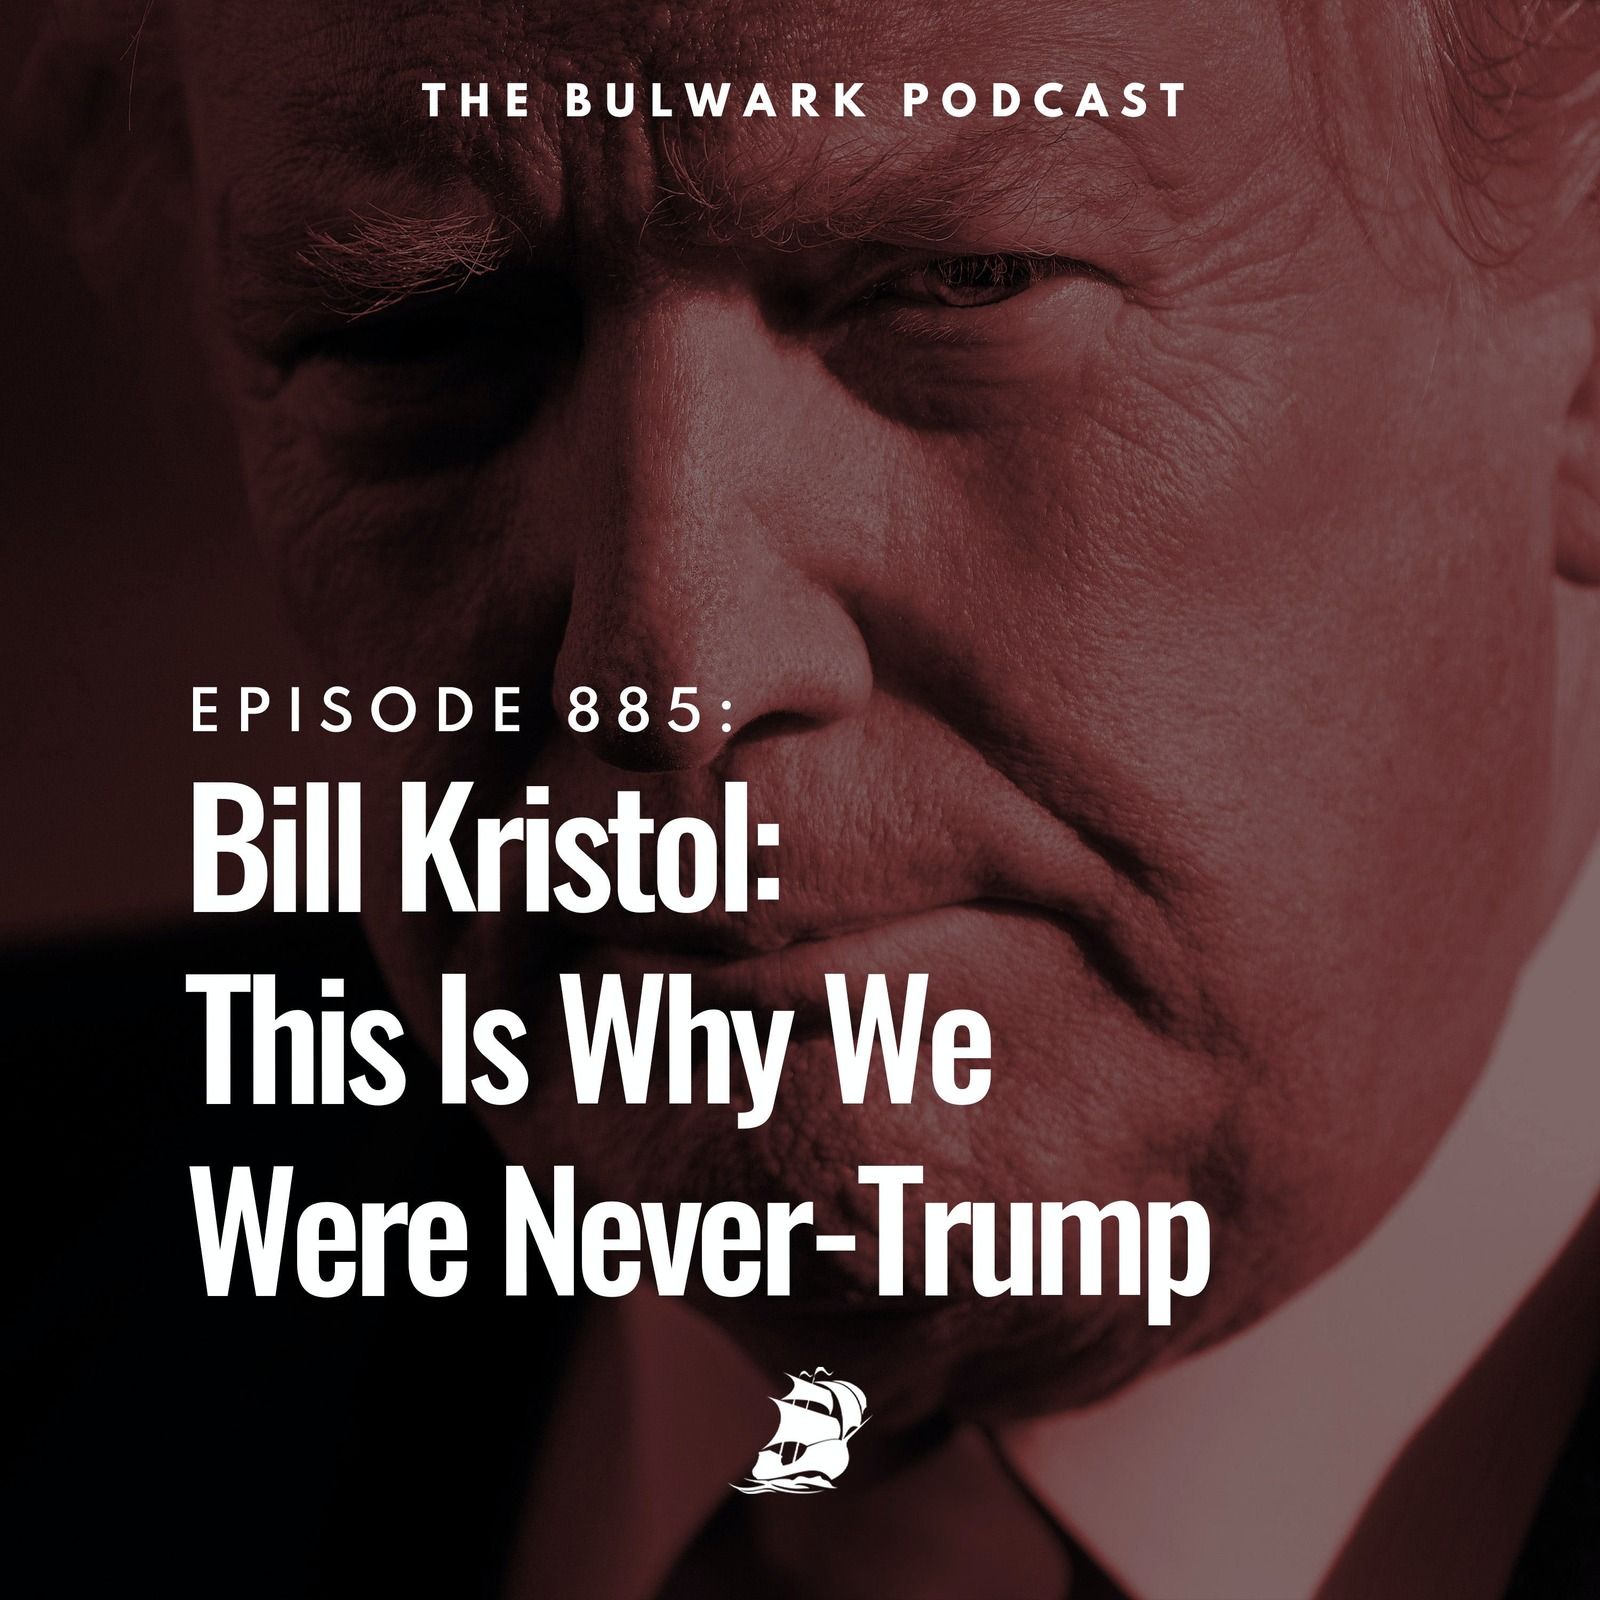 Bill Kristol: This Is Why We Were Never-Trump